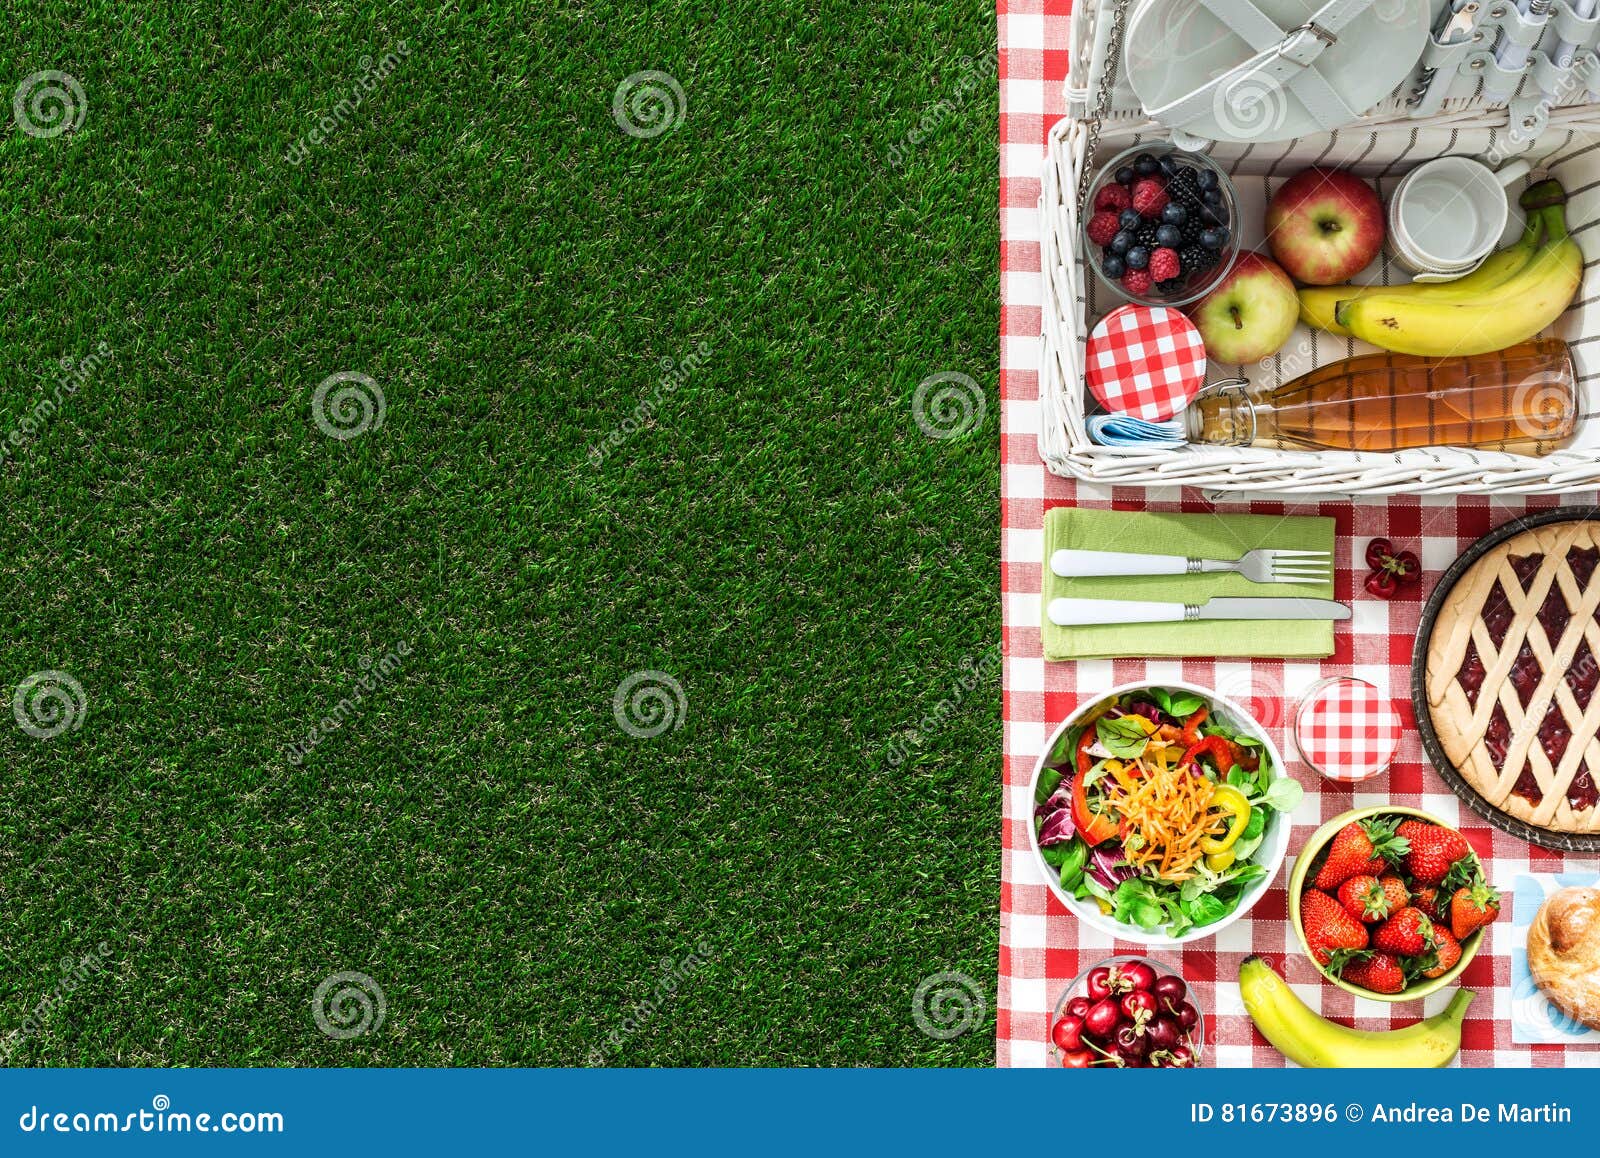 Picnic at the park stock photo. Image of meal, eating - 81673896